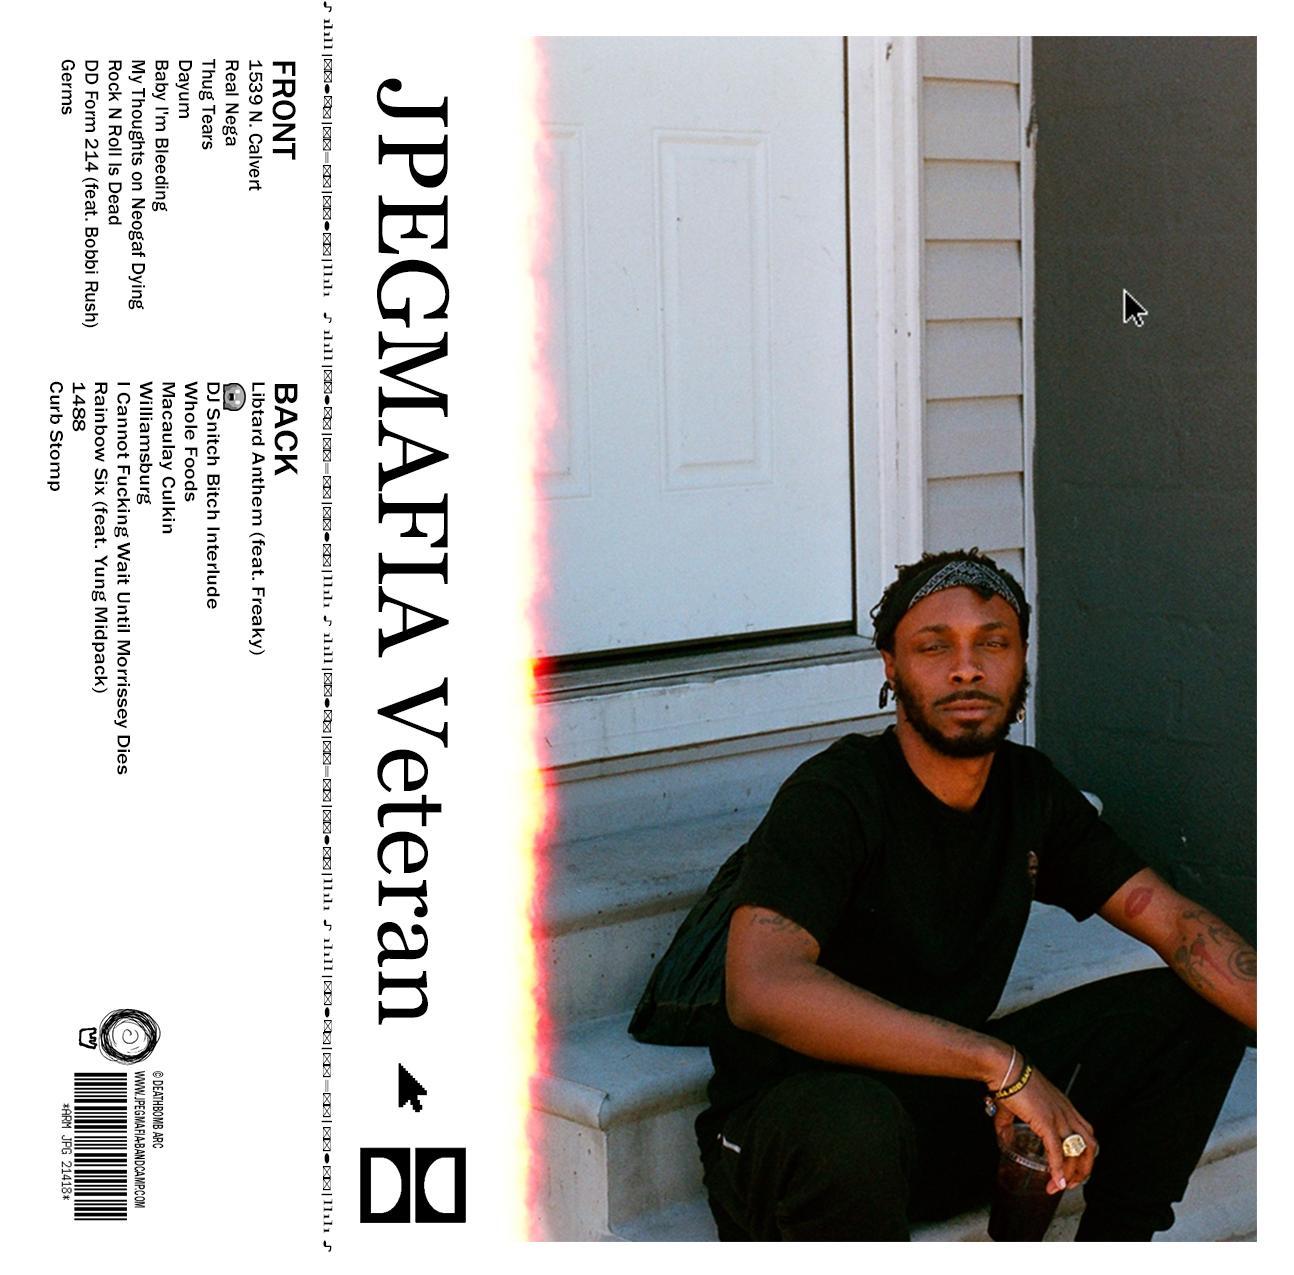 JPEGMAFIA kicks off the decade with LP a project reflecting that his  creative hot streak isnt ending anytime soon  Echo